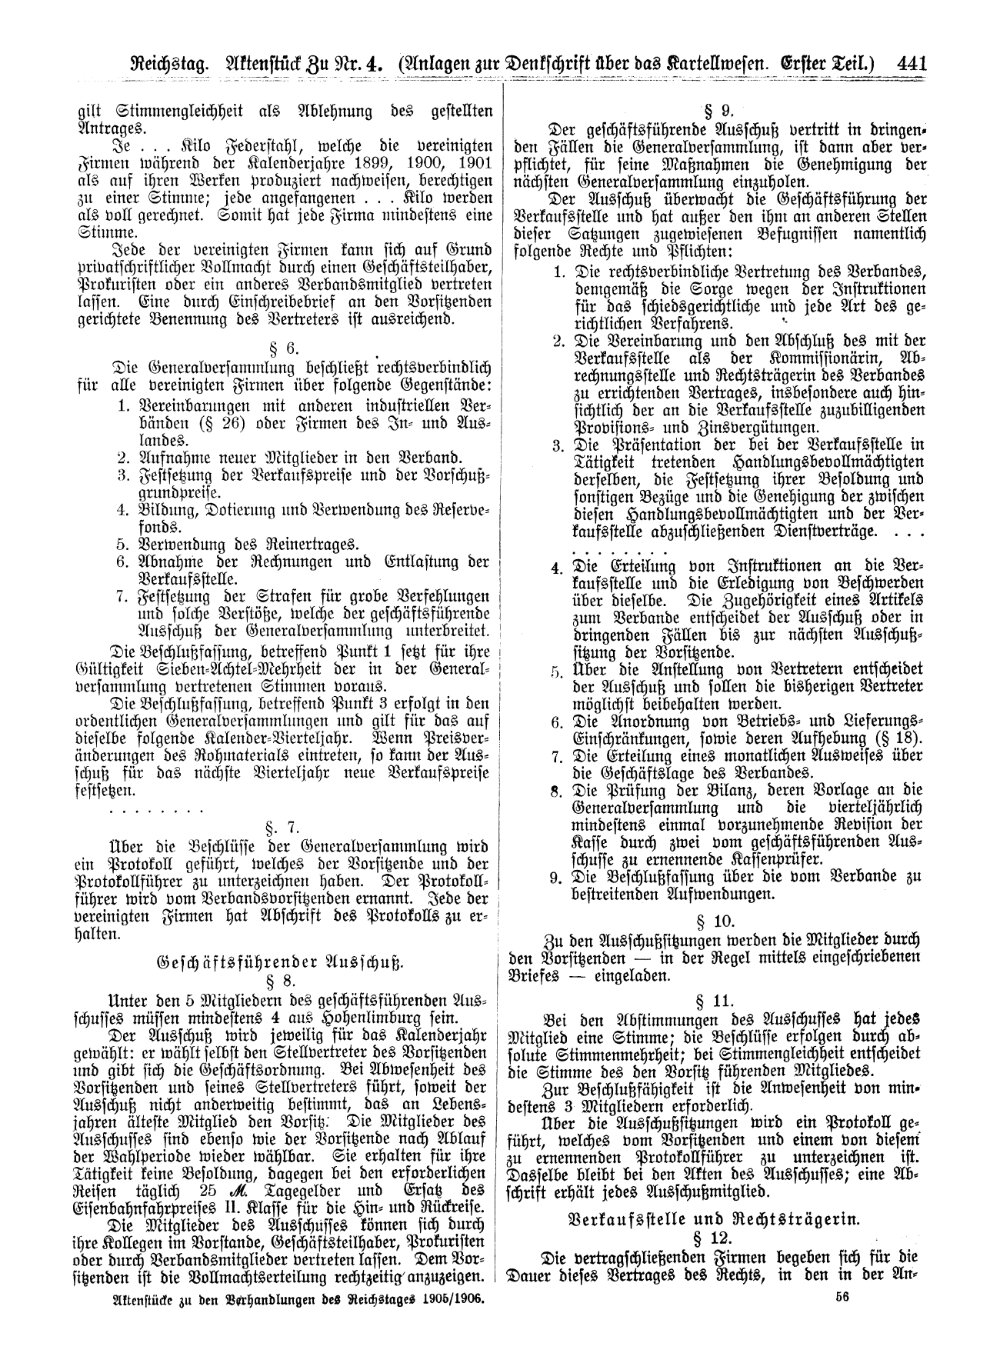 Scan of page 441